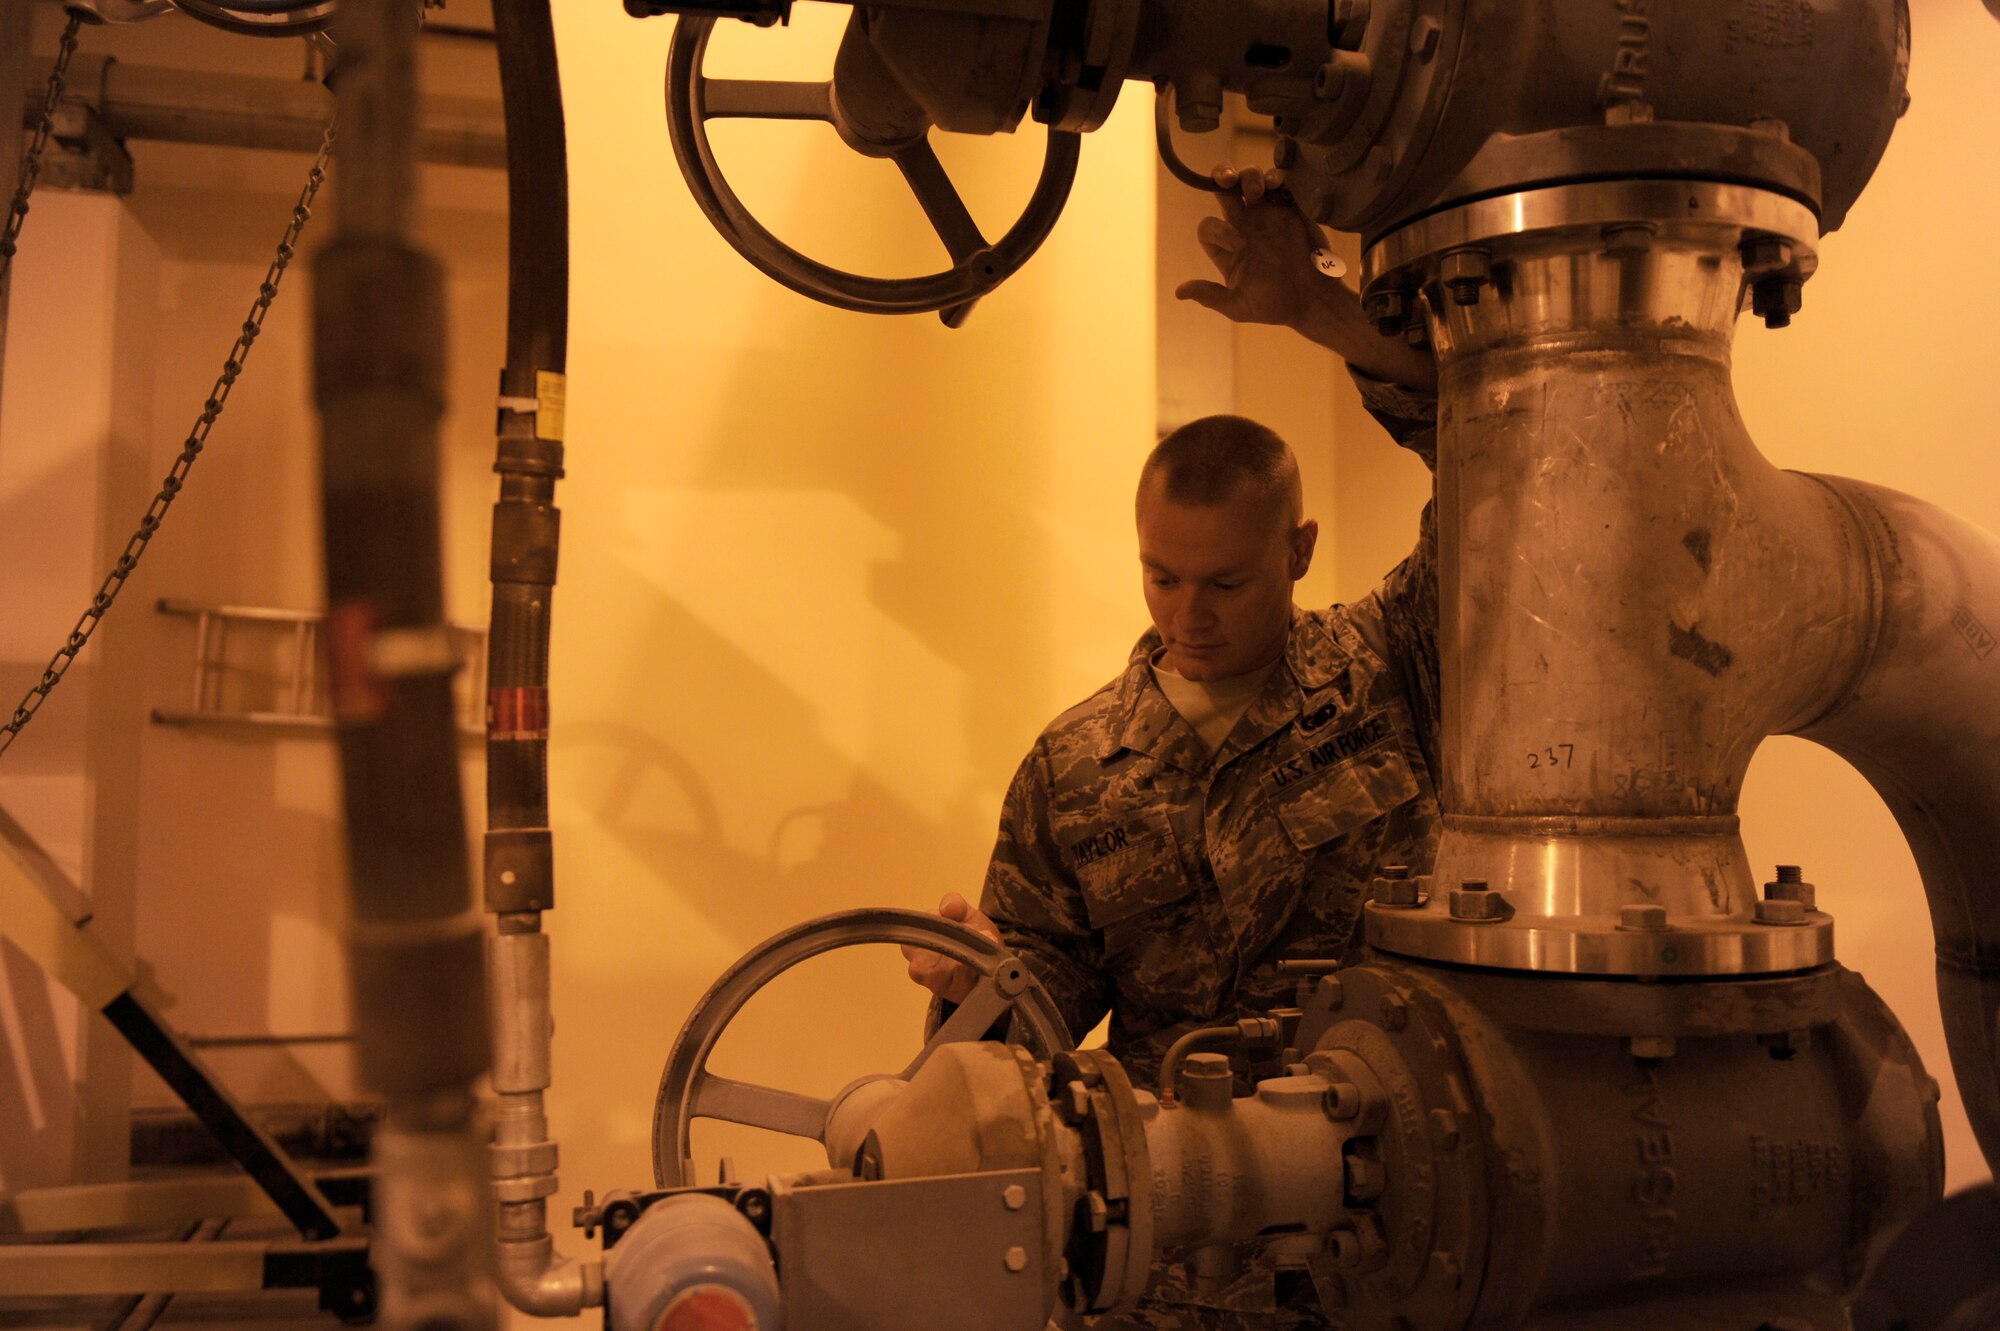 Senior Airman. Isaac Taylor, 380th Expeditionary Logistics Readiness Squadron, fuels flight, prepares "Bubba," a type three hydrant system, for receipt of fuel, April 4 at an undisclosed location in Southwest Asia. "Bubba" is utilized to issue 100% of the JP8 Fuel to the 380th Air Expeditionary Wing. Airman Taylor is deployed from Little Rock AFB, Ark. and hails from Searcy, Ark. (U.S. Air Force photo by Senior Airman Brian J. Ellis) (Released)